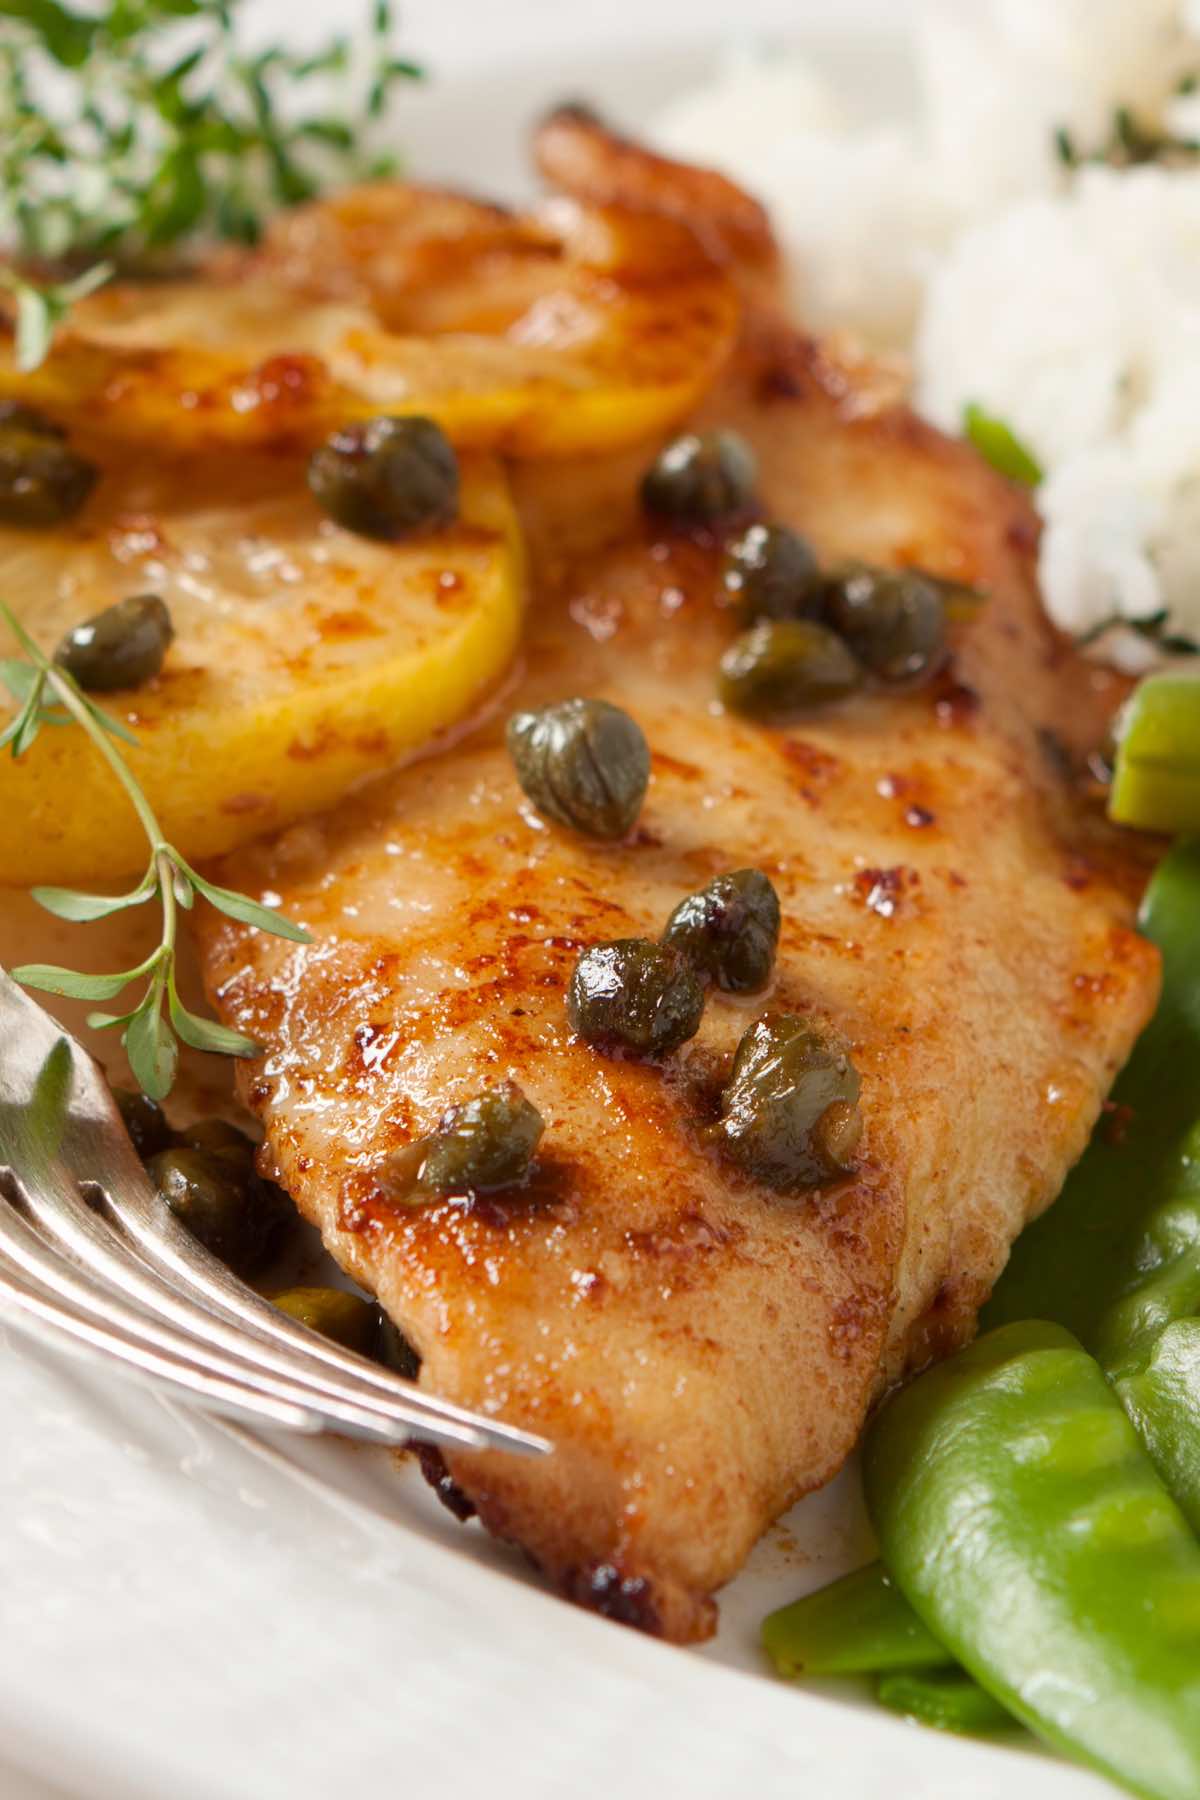 If you’re looking for some quick and easy side dishes to serve with chicken piccata, look no further than these 15 Best Chicken Piccata Sides below. From pasta to potatoes to veggies, you’re definitely spoiled for choice.